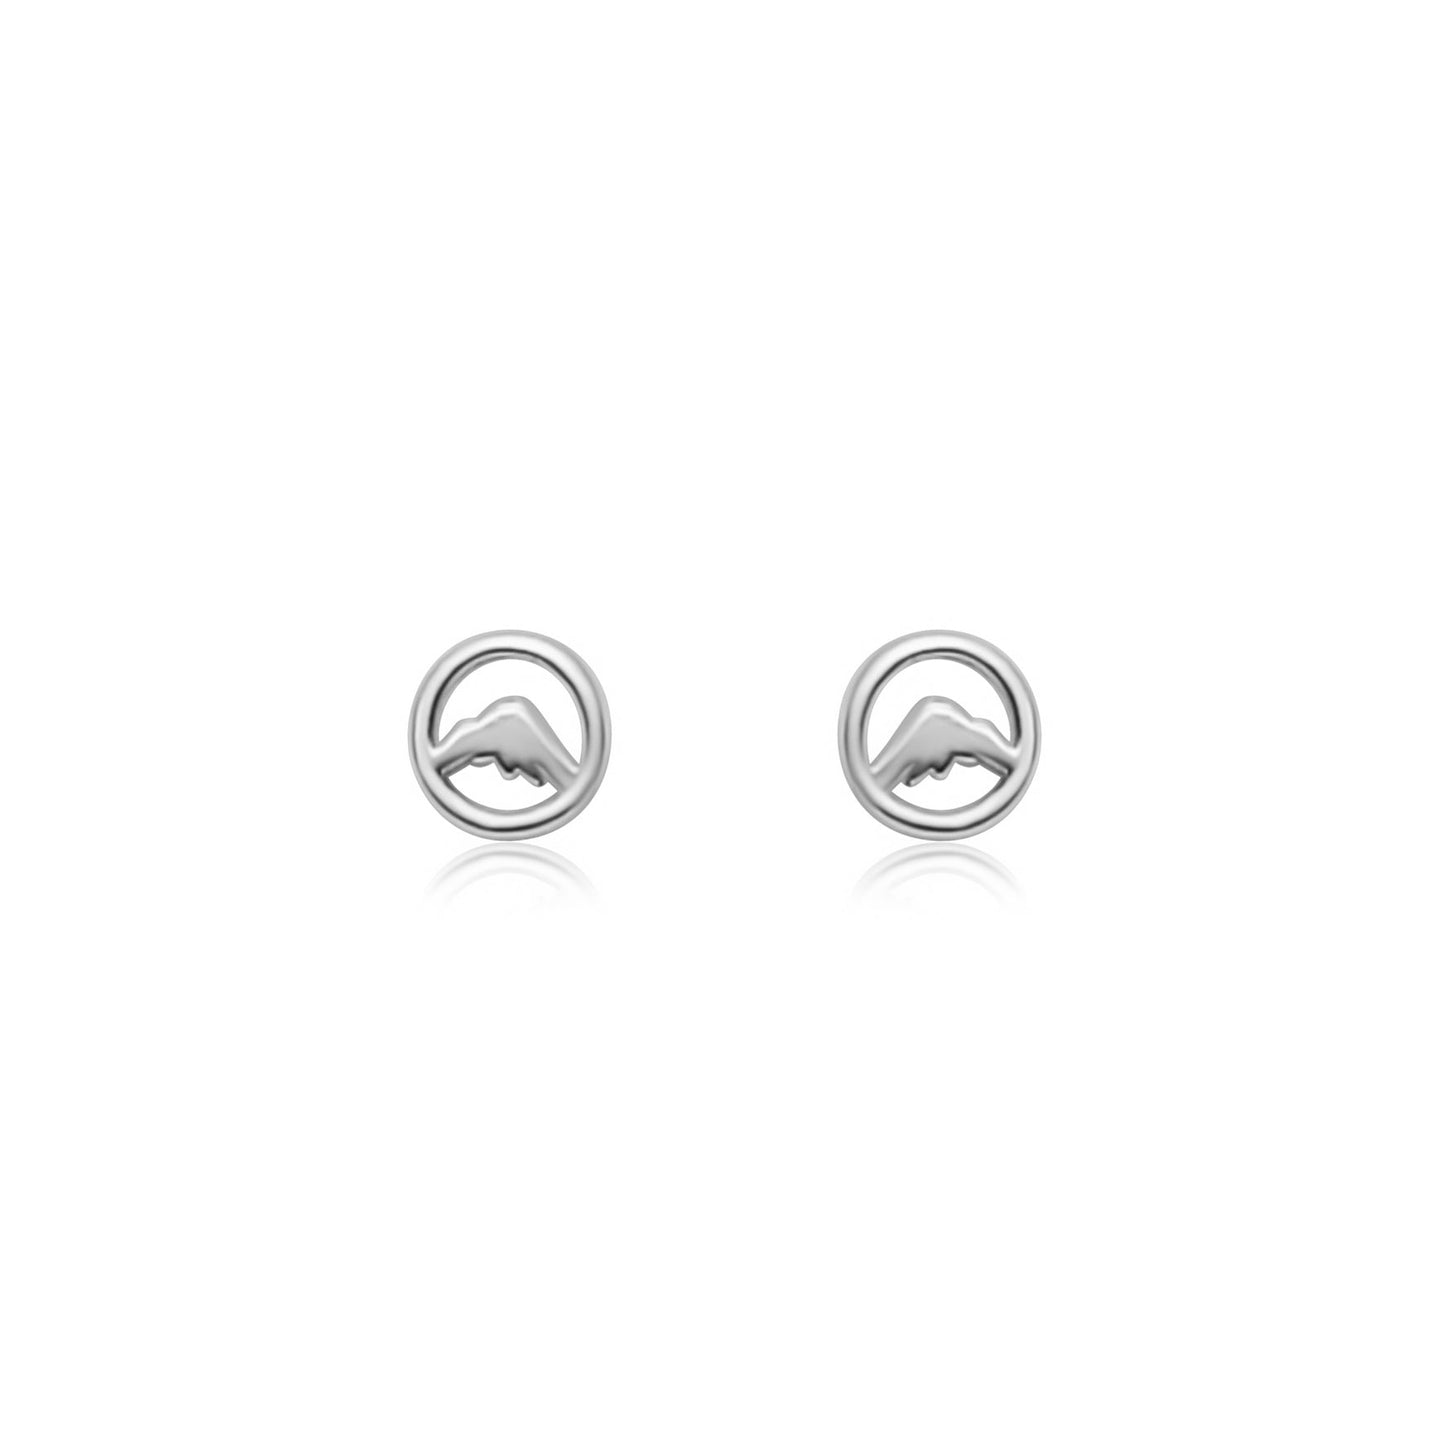 Sterling silver Beaumont stud earrings with small circle mountain charm